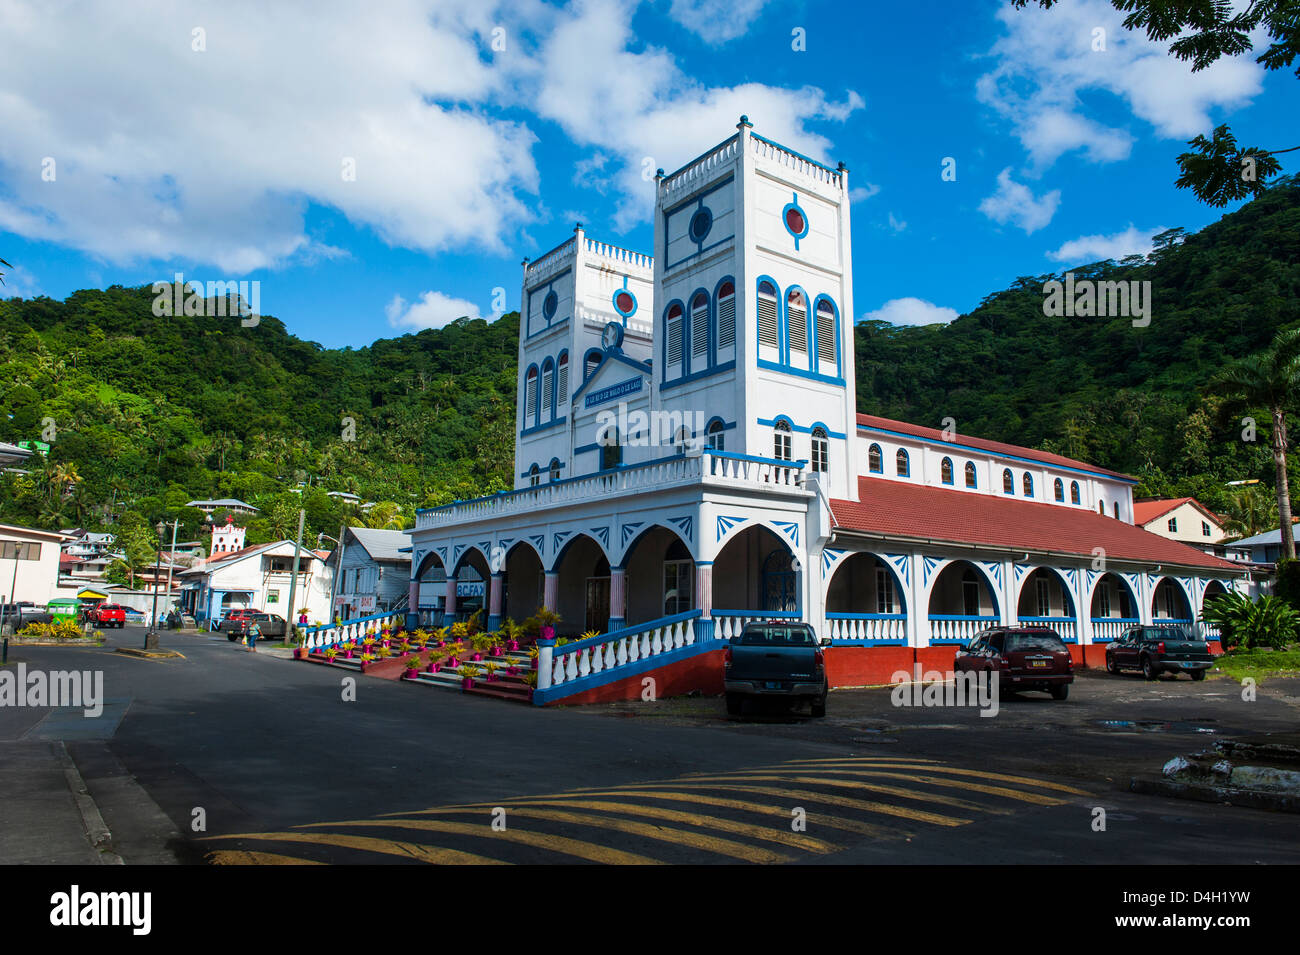 Cathedral in downton Pago Pago, Tutuila island, American Samoa, South Pacific Stock Photo